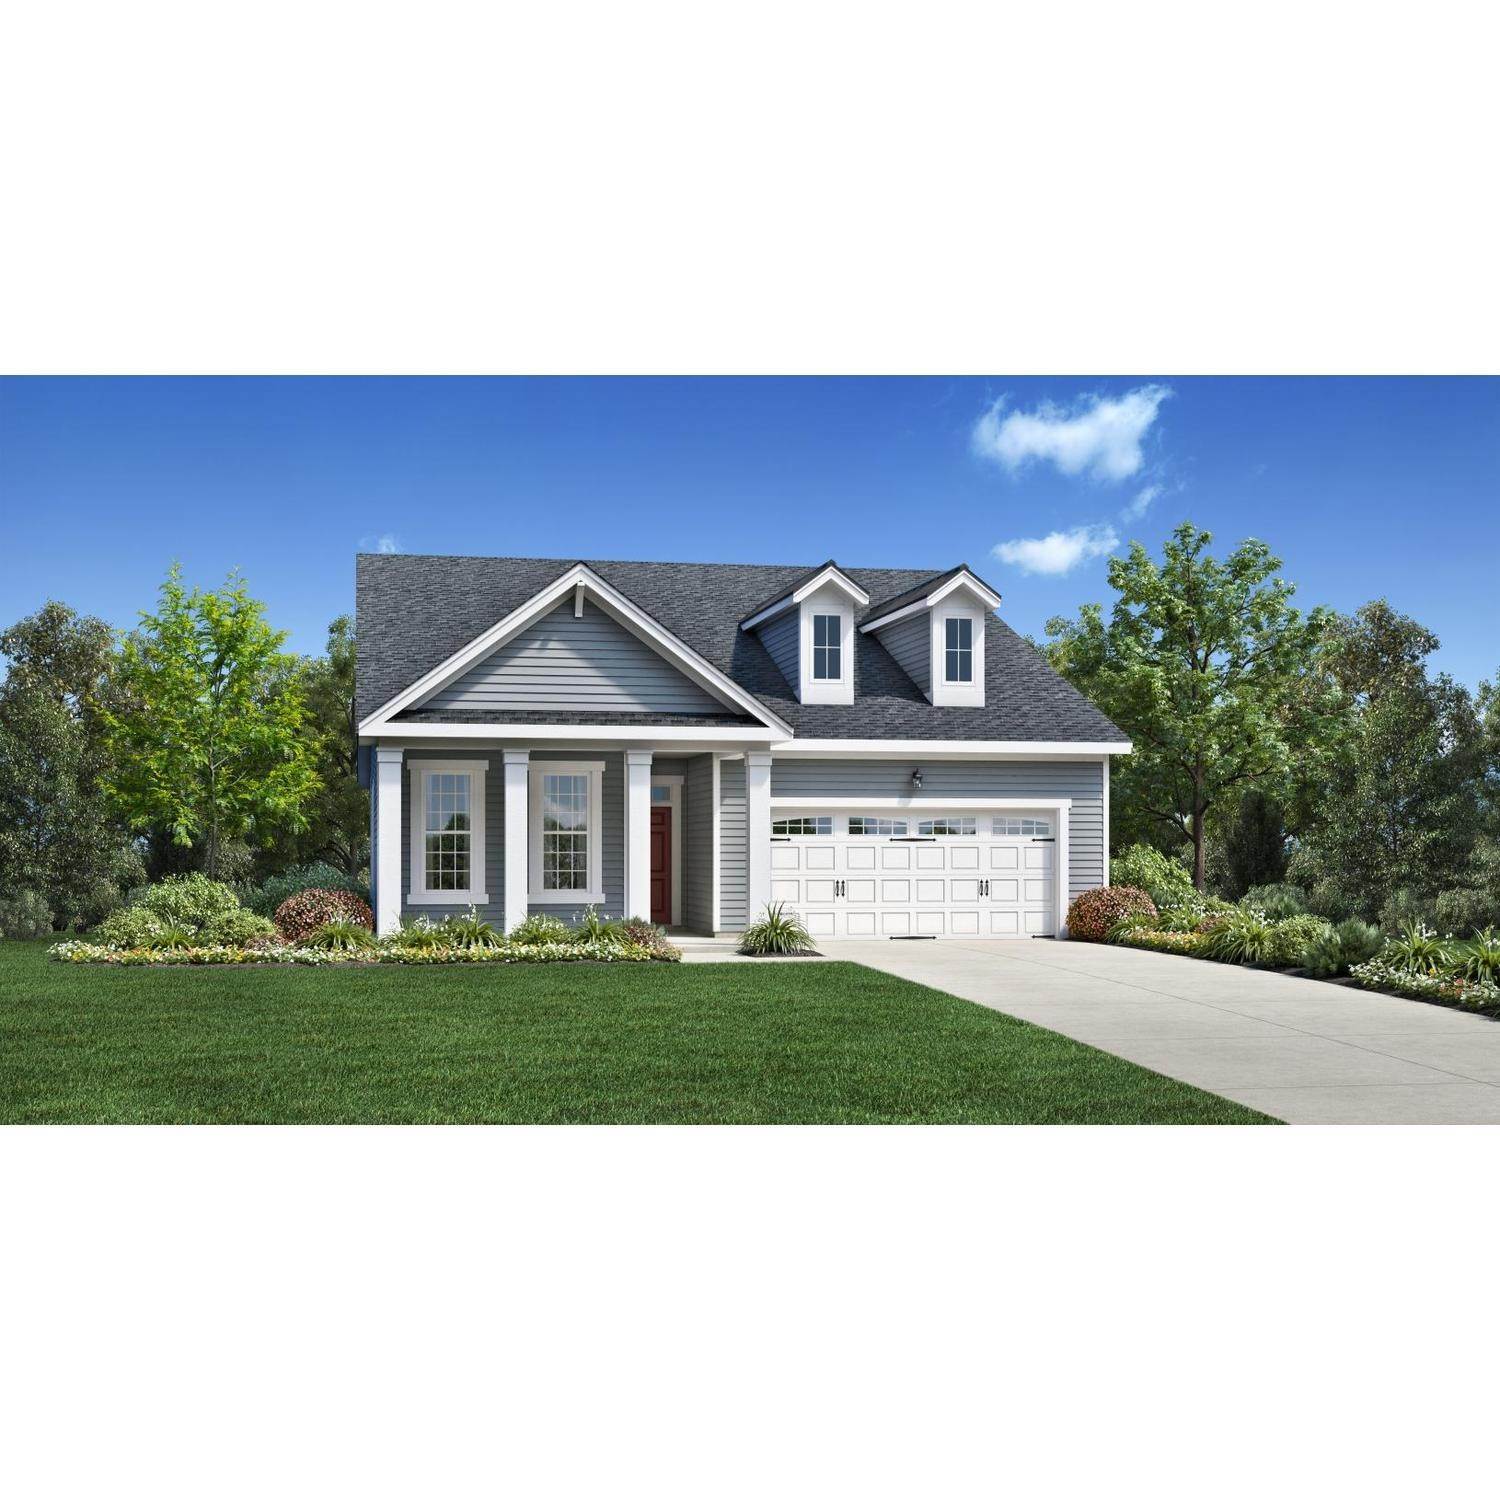 Single Family for Sale at Retreat At Cedar Crossing 3521 Olive Glen Dr, Apex, NC 27502